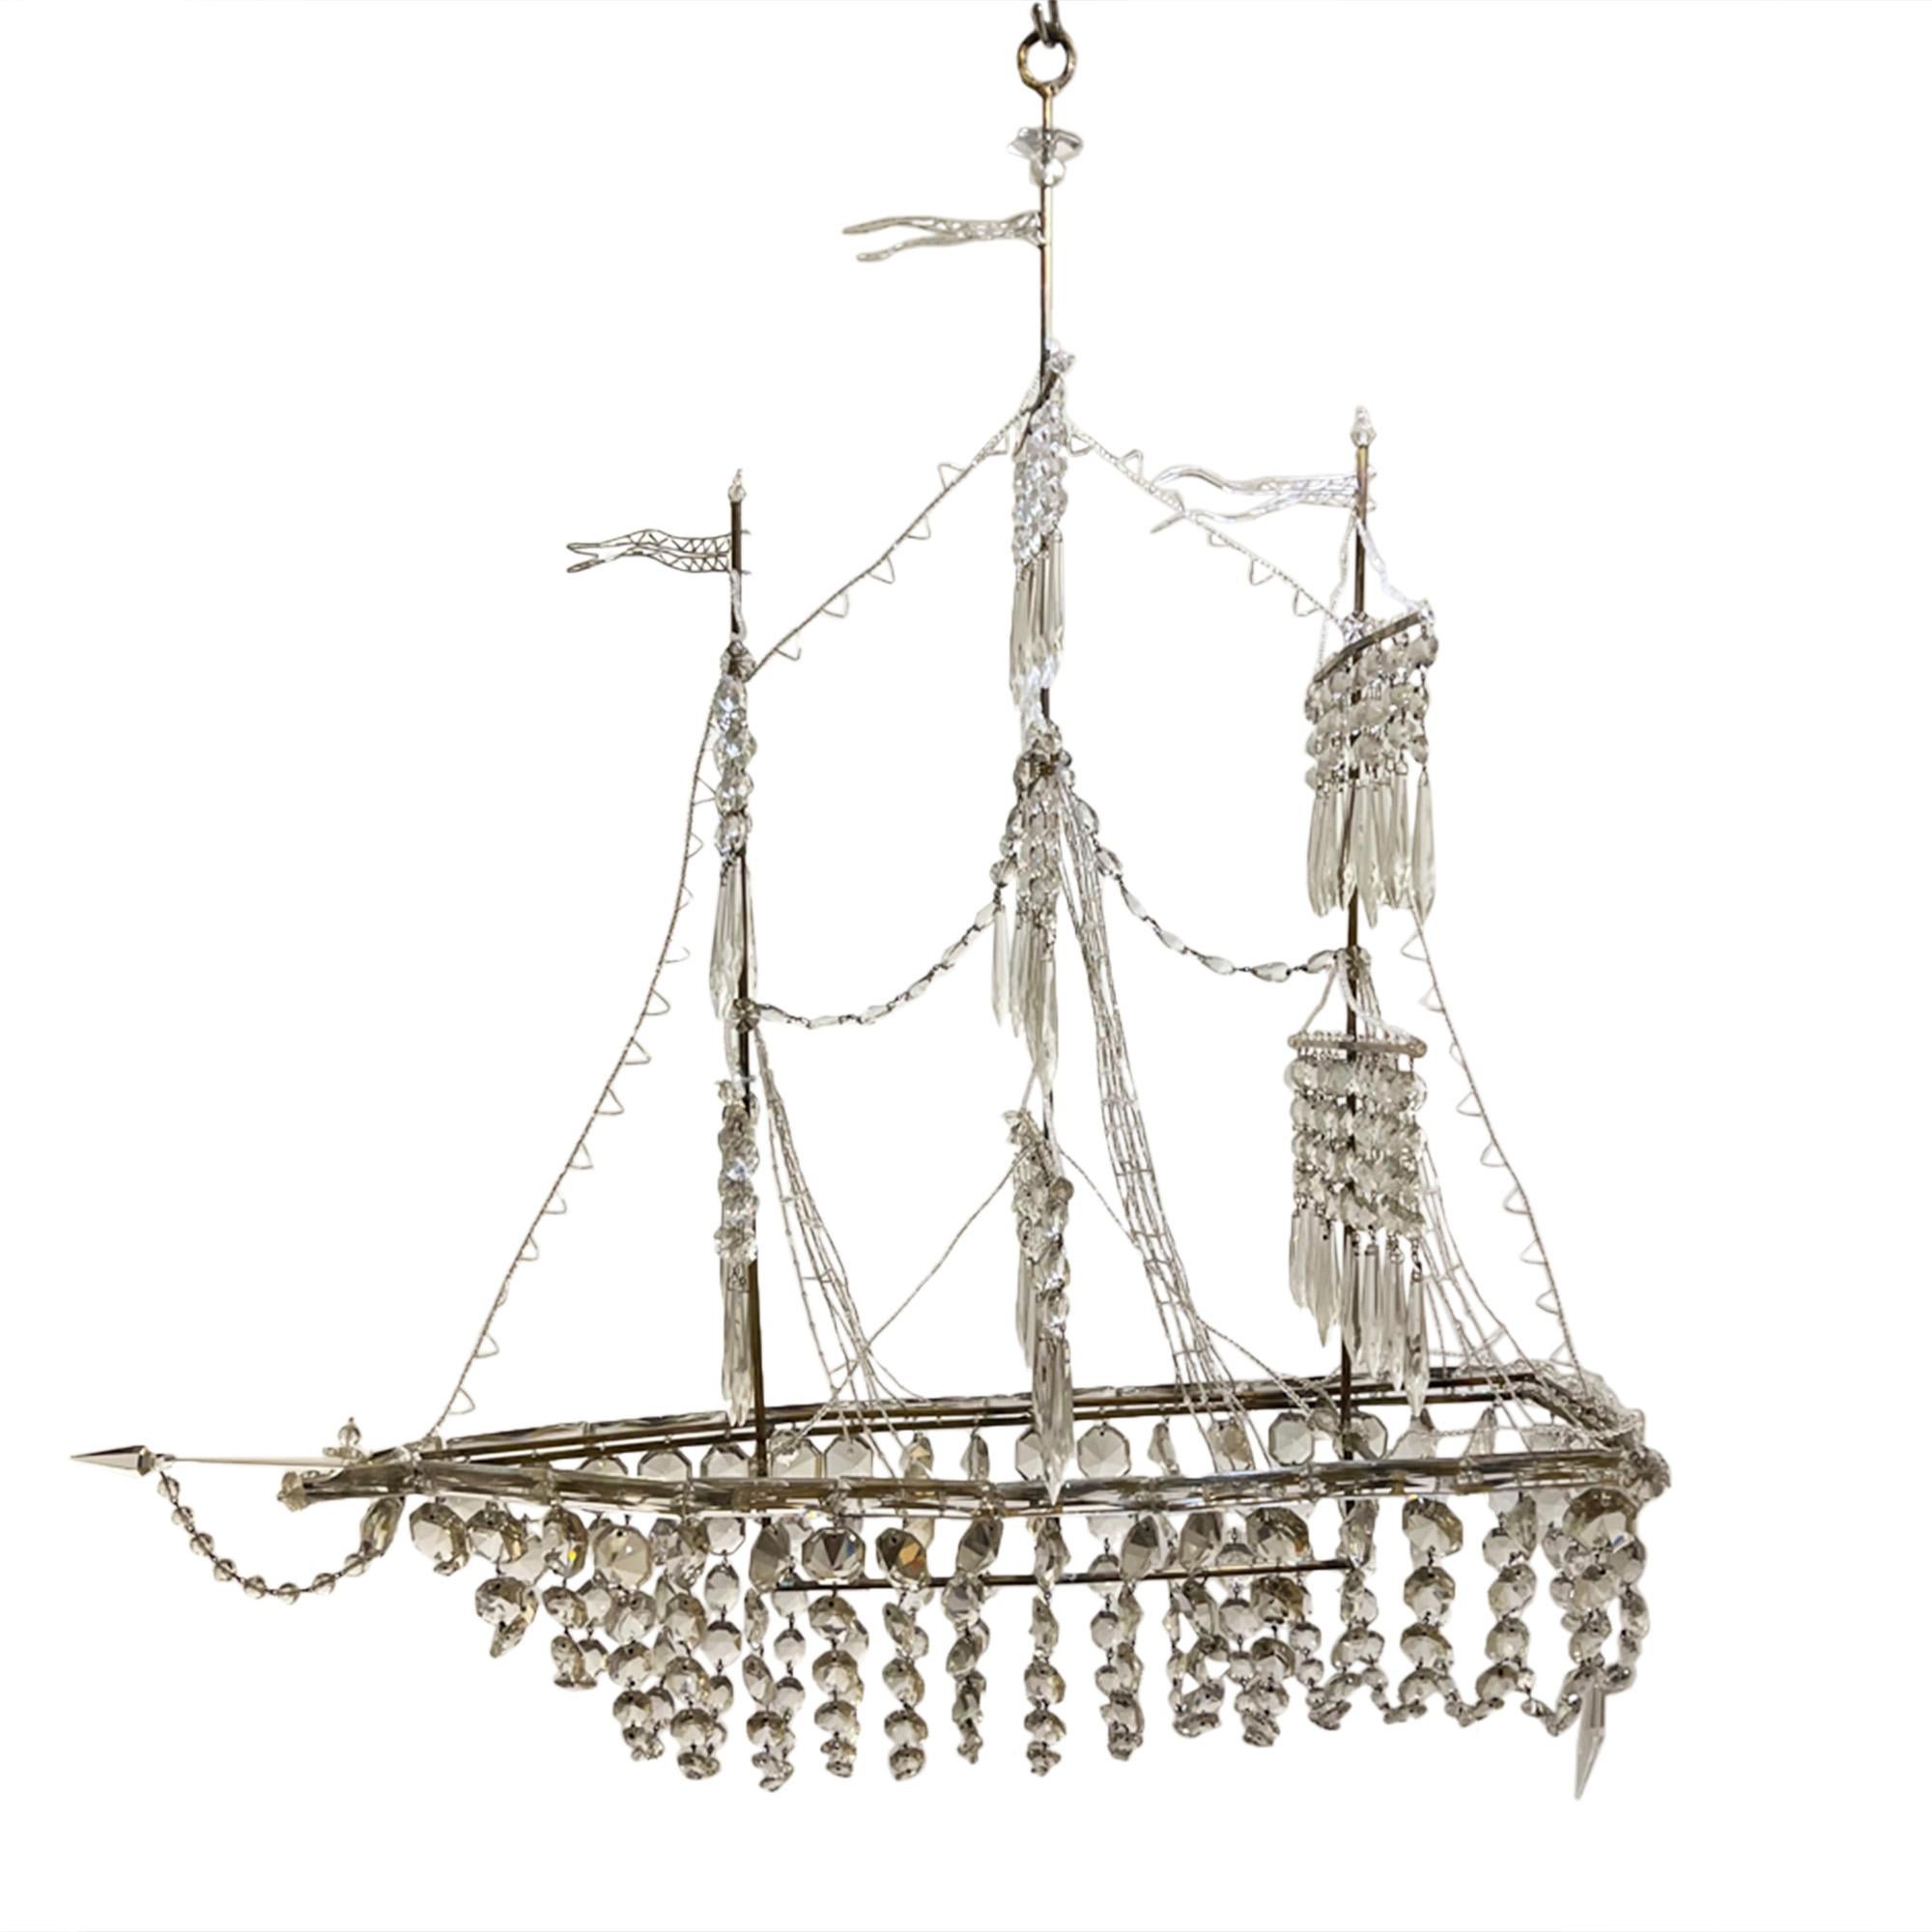 This large fully restored ship chandelier was made in France in the 1970s. We particularly like the meticulous attention to detail - scroll through the pictures to see the anchor and the lovely rigging and flags.

Stunning!